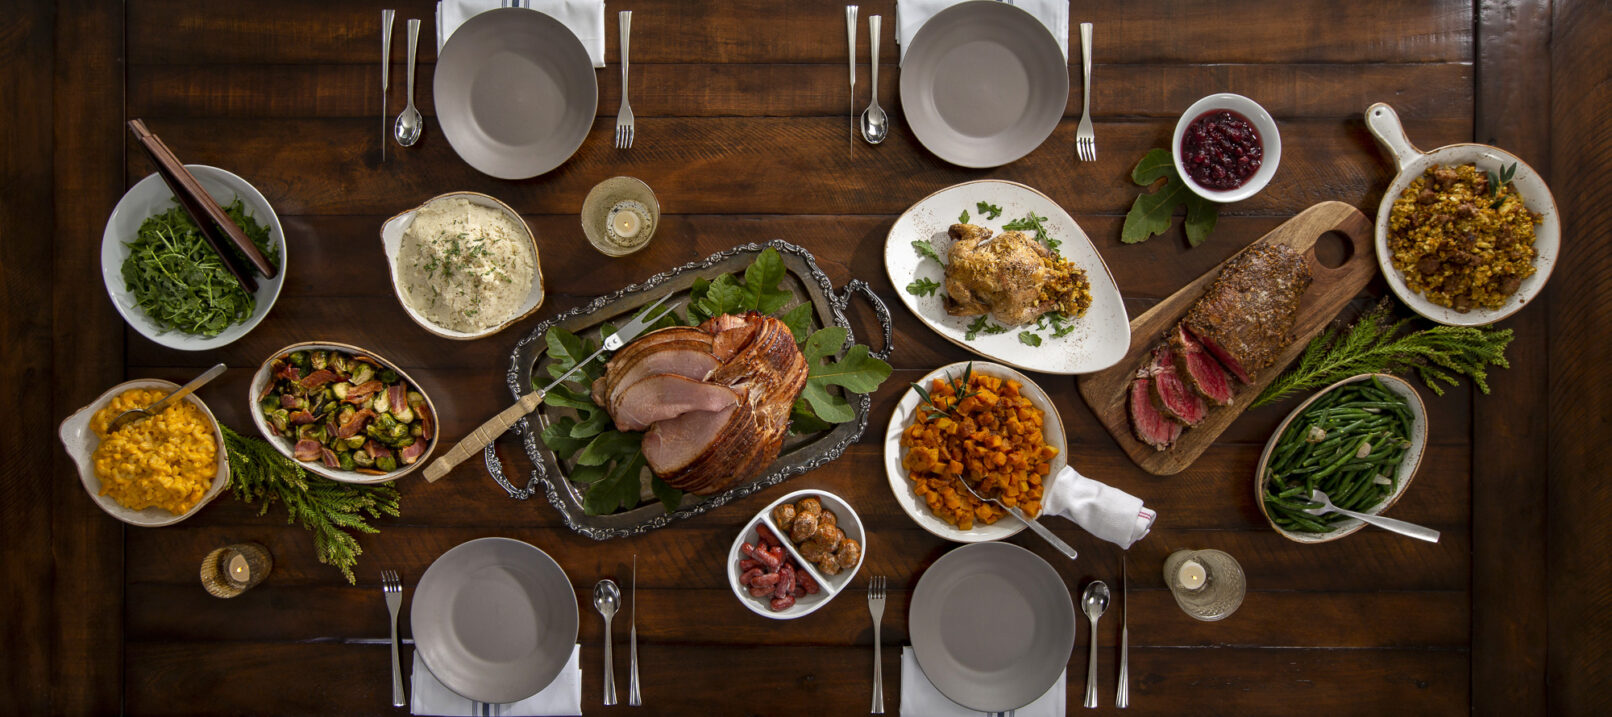 Commercial photography of a holiday dinner table